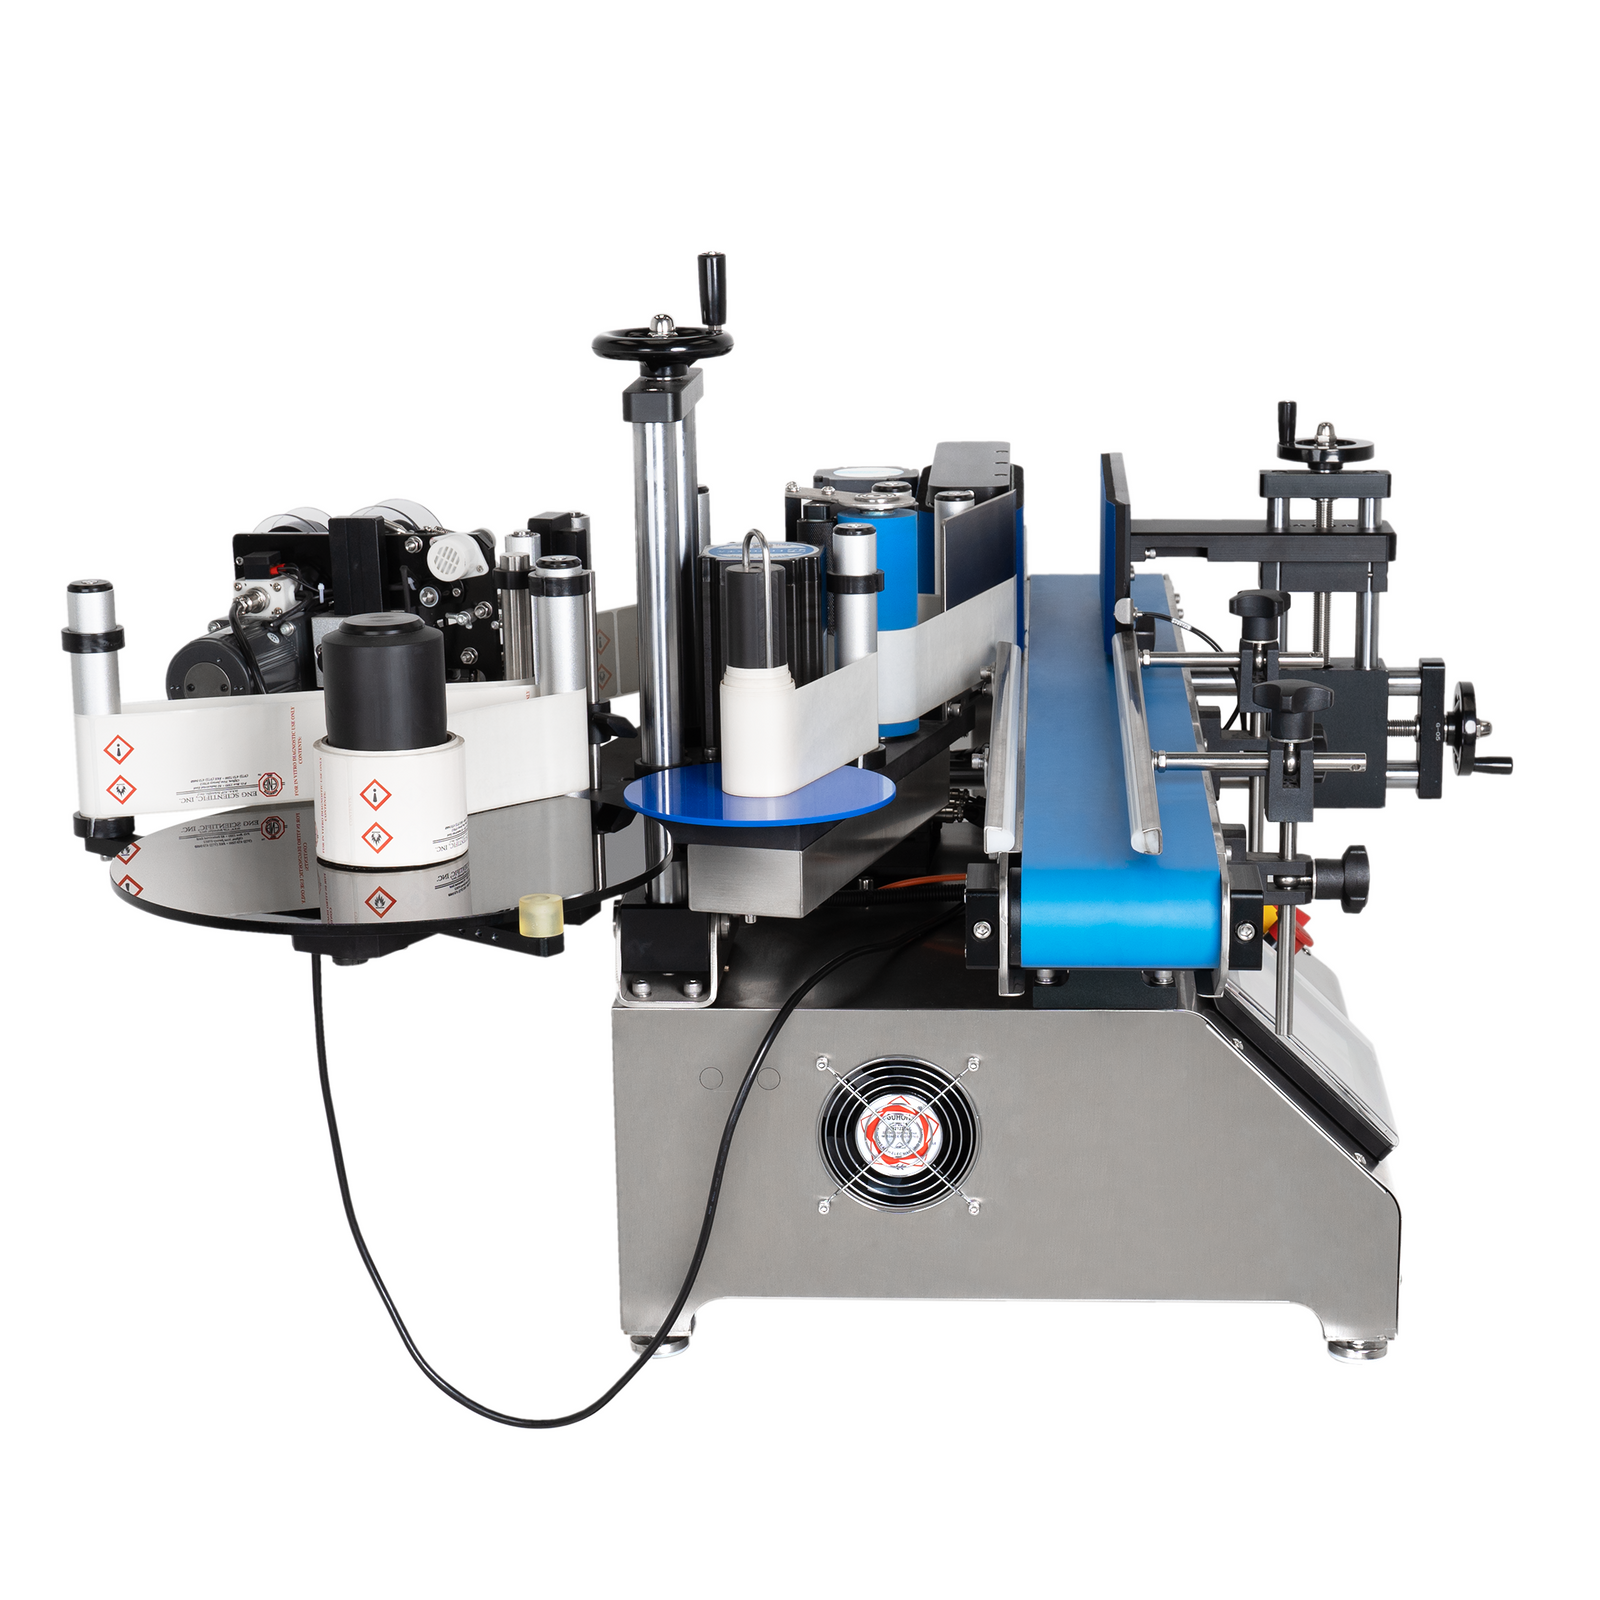 Table top automatic label applicator system with coder